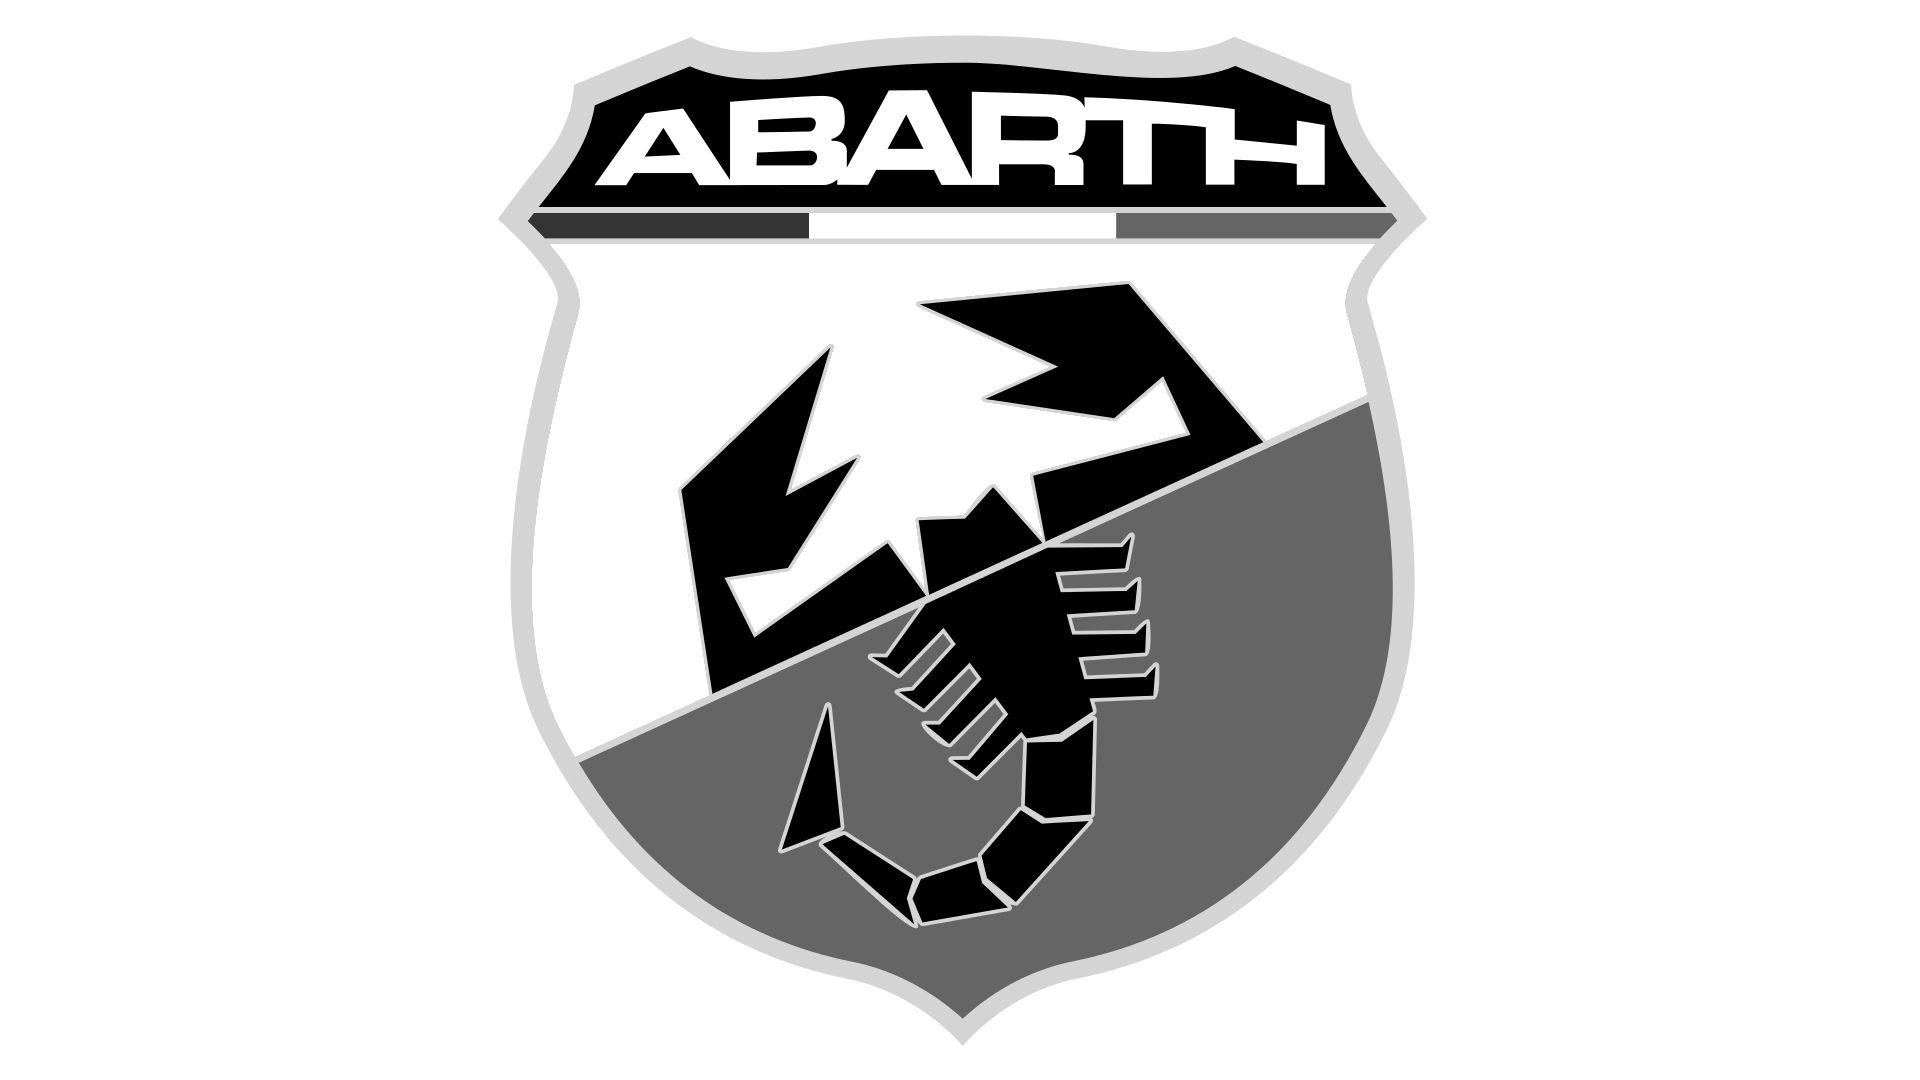 Abarth Logo - Abarth Logo Meaning and History, latest models | World Cars Brands